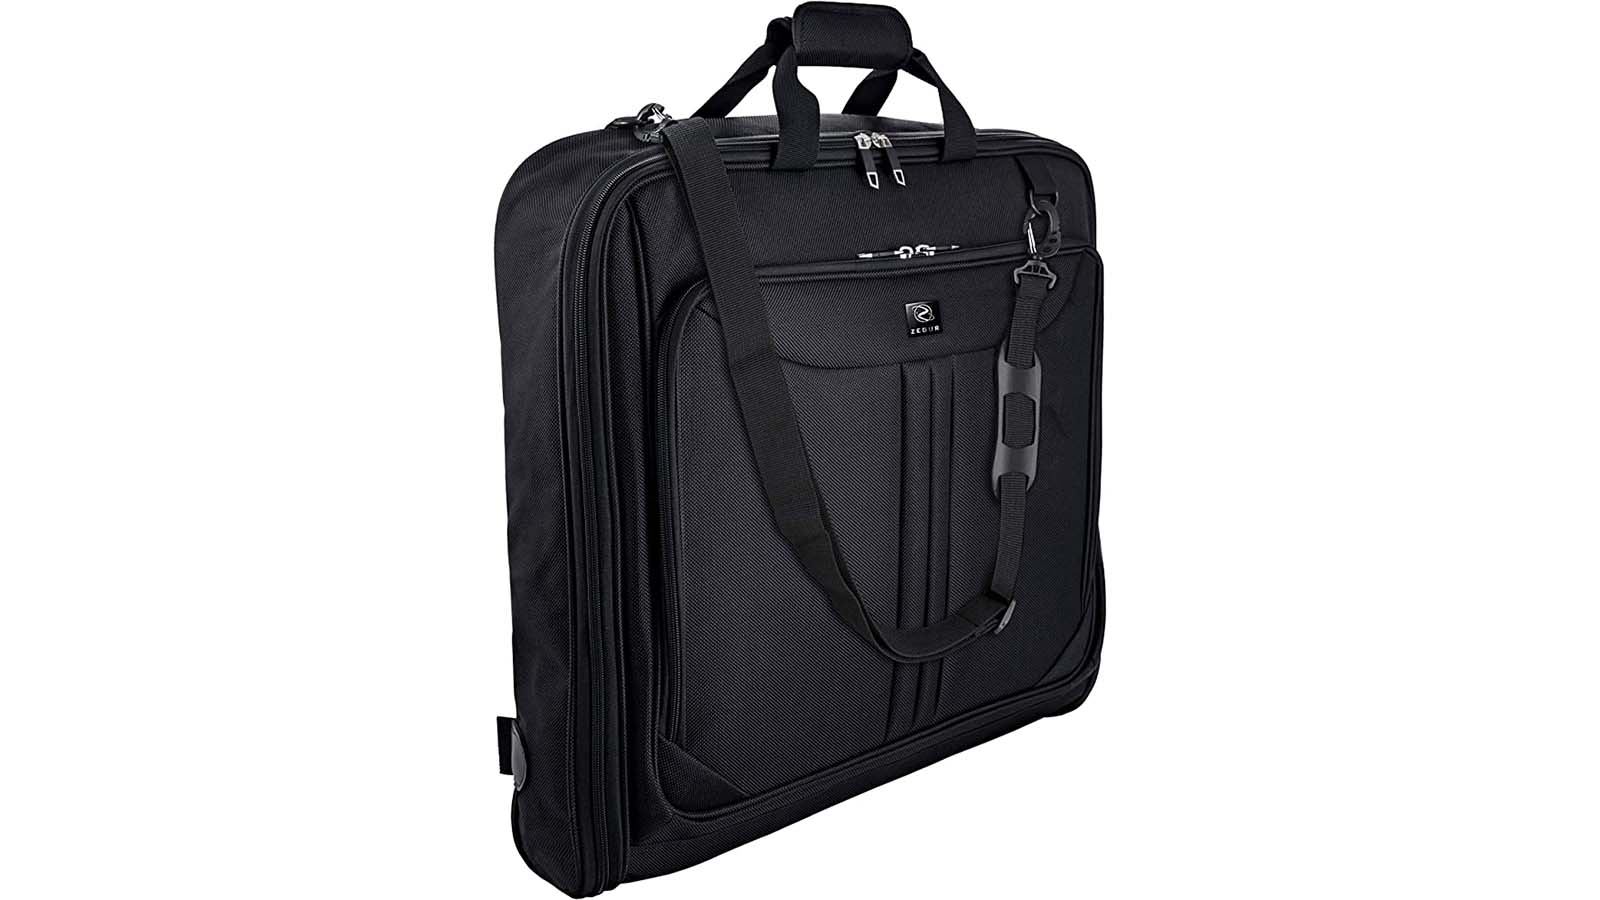 Best Garment Bags That Are Easy To Travel With